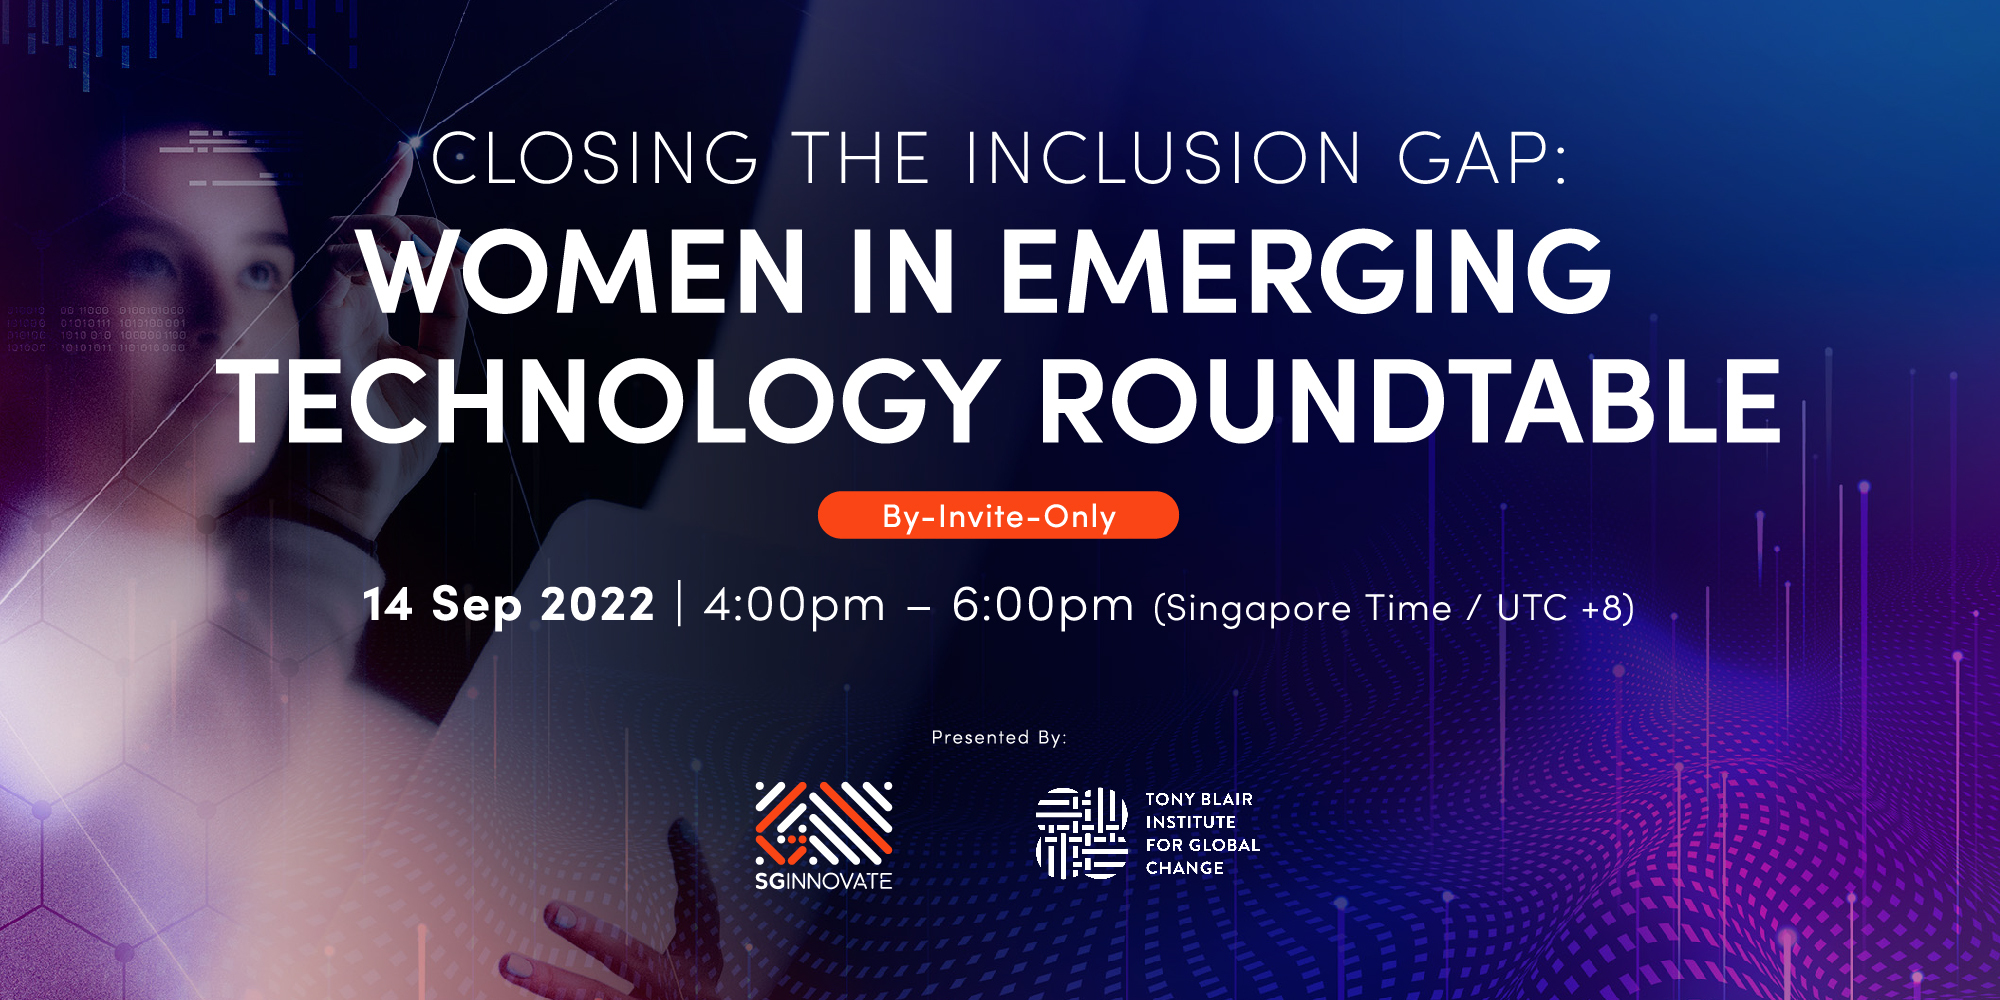 Closing the Inclusion Gap: Women in Emerging Technology Roundtable